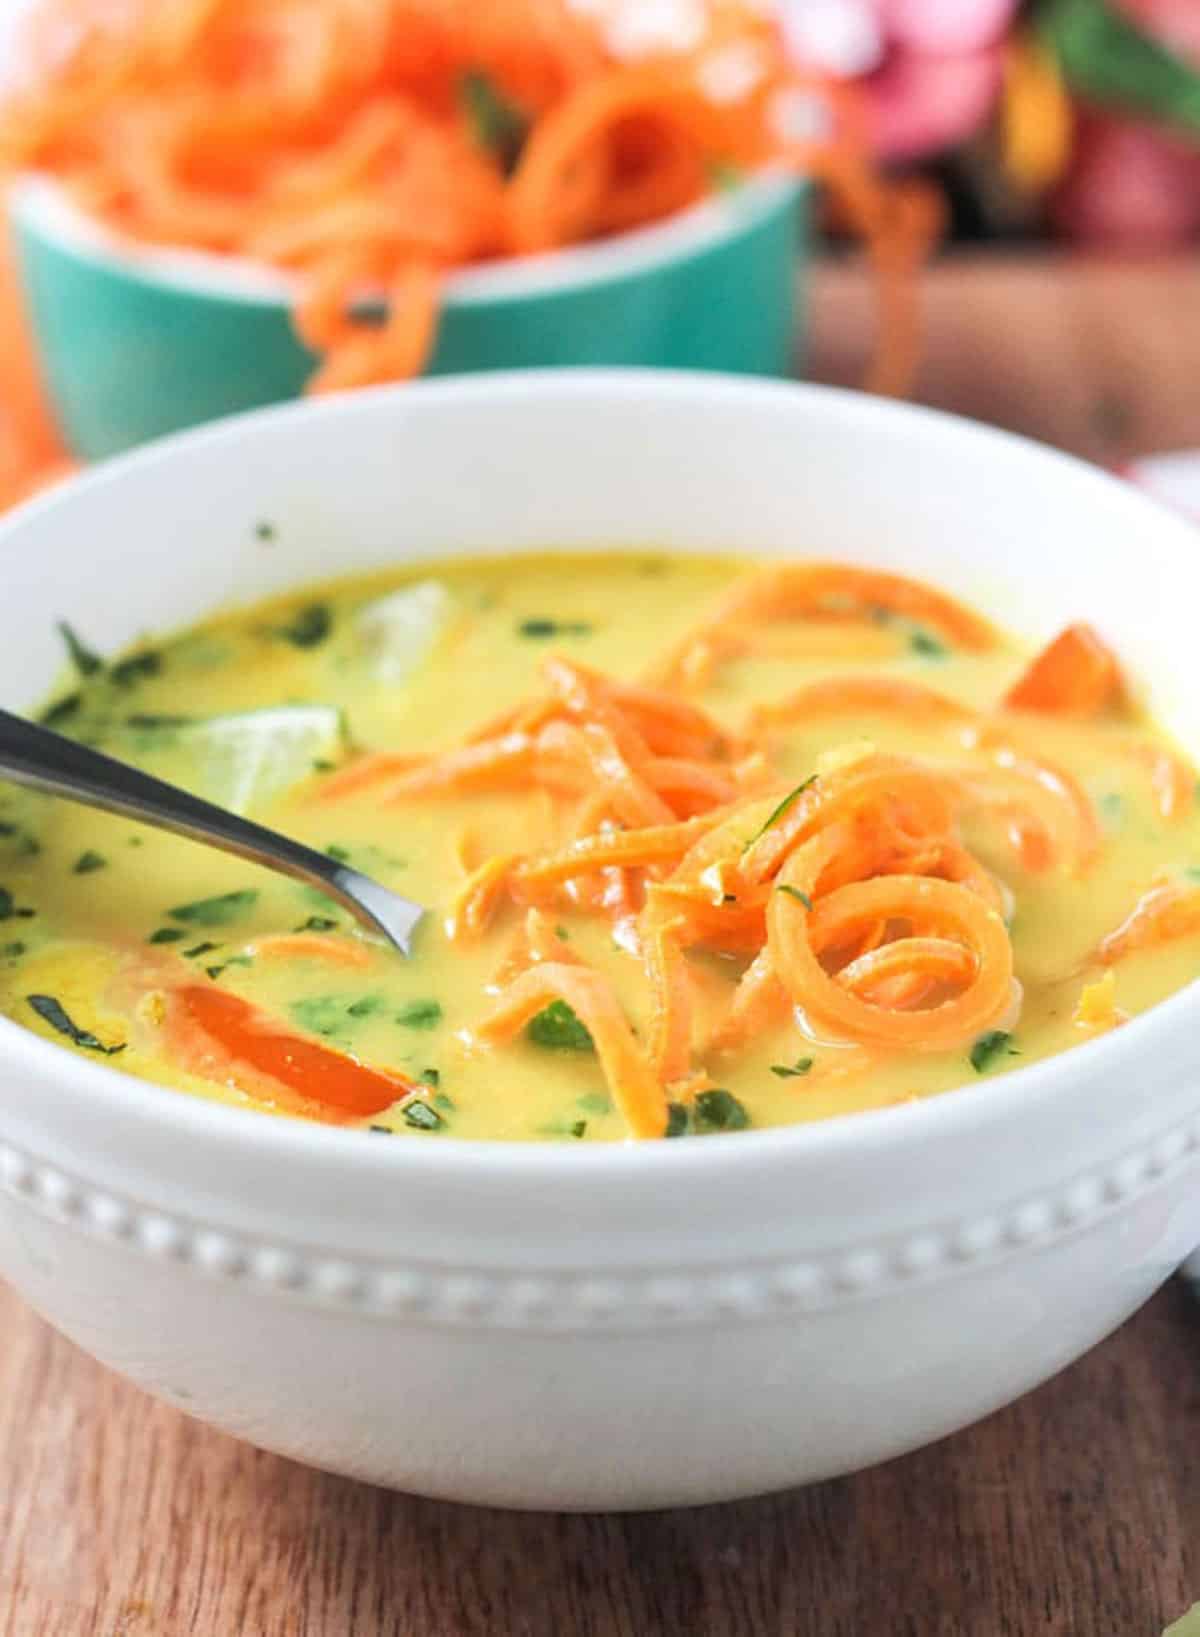 Close up of sweet potato noodles in a bowl of curry soup.